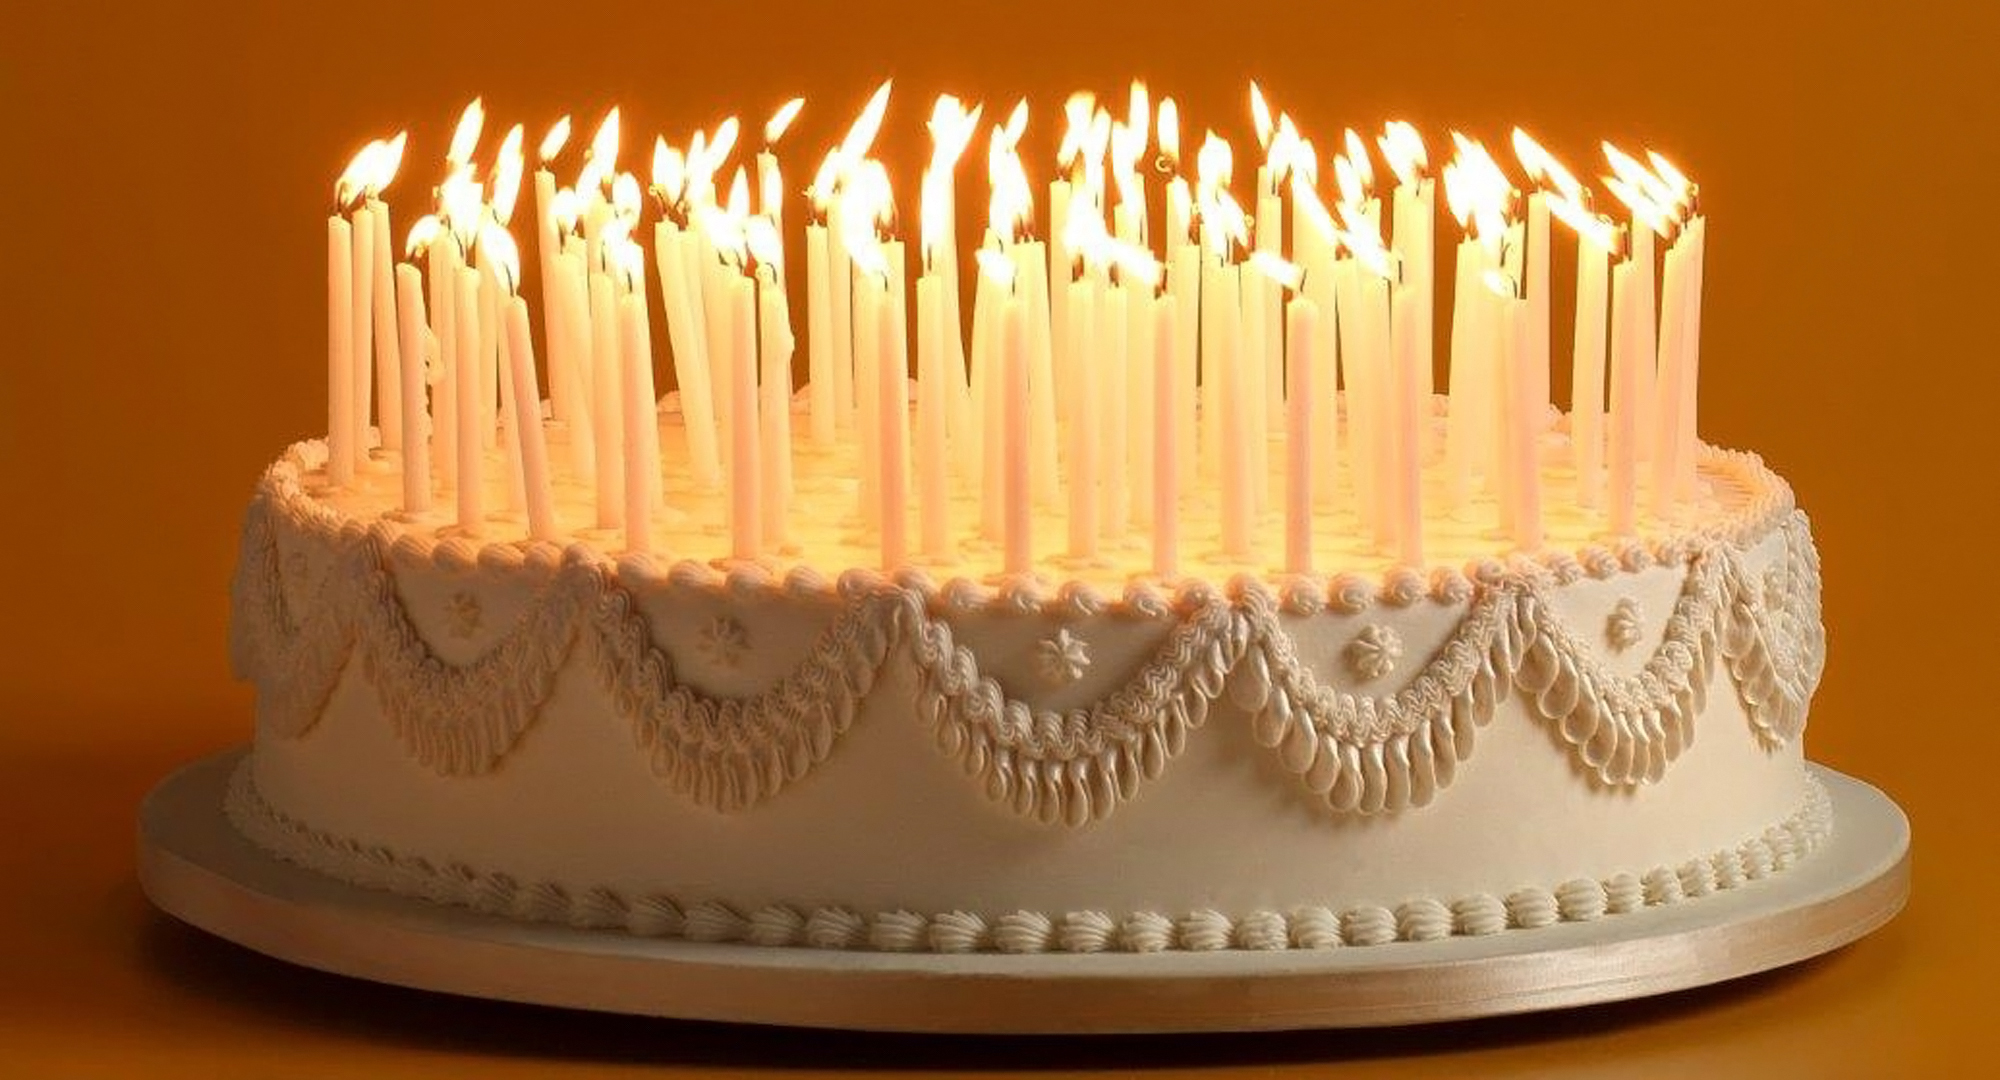 Cake with many candles on it